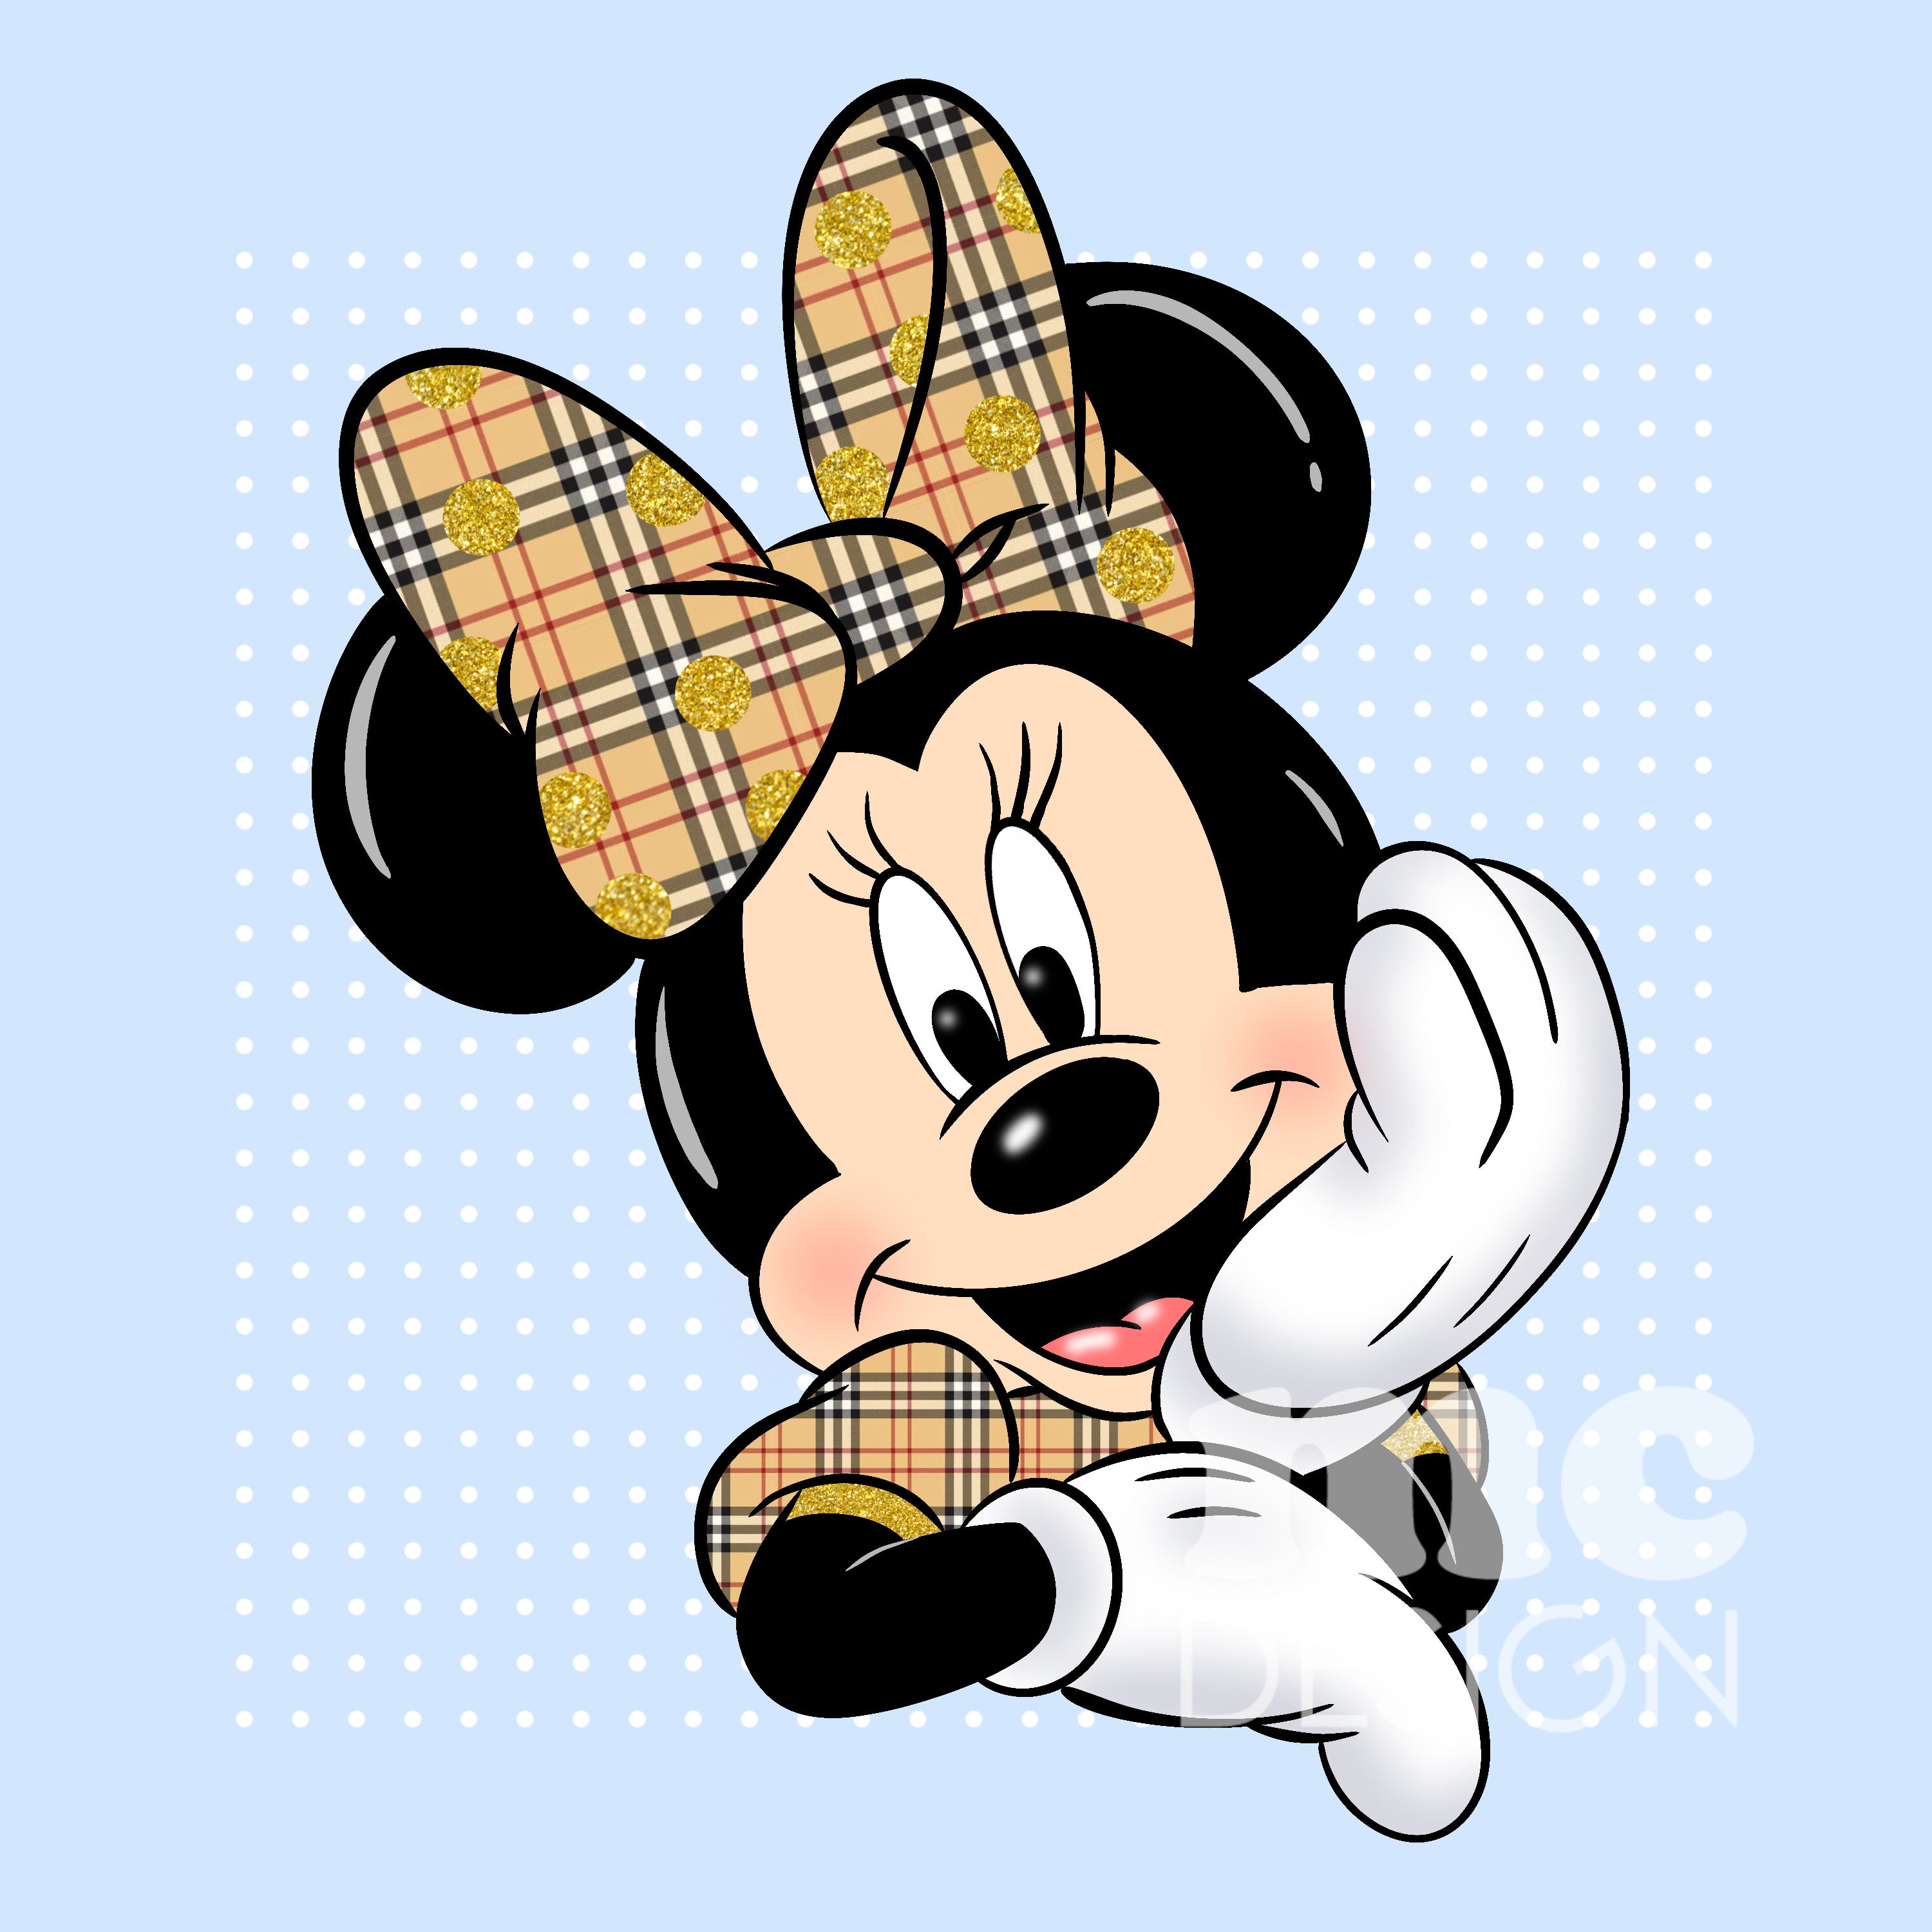 Gucci Baby Minnie Mouse Png, Minnie Mouse Png, Gucci Logo Fashion Png,  Gucci Logo Png, Fashion Logo Png - Download